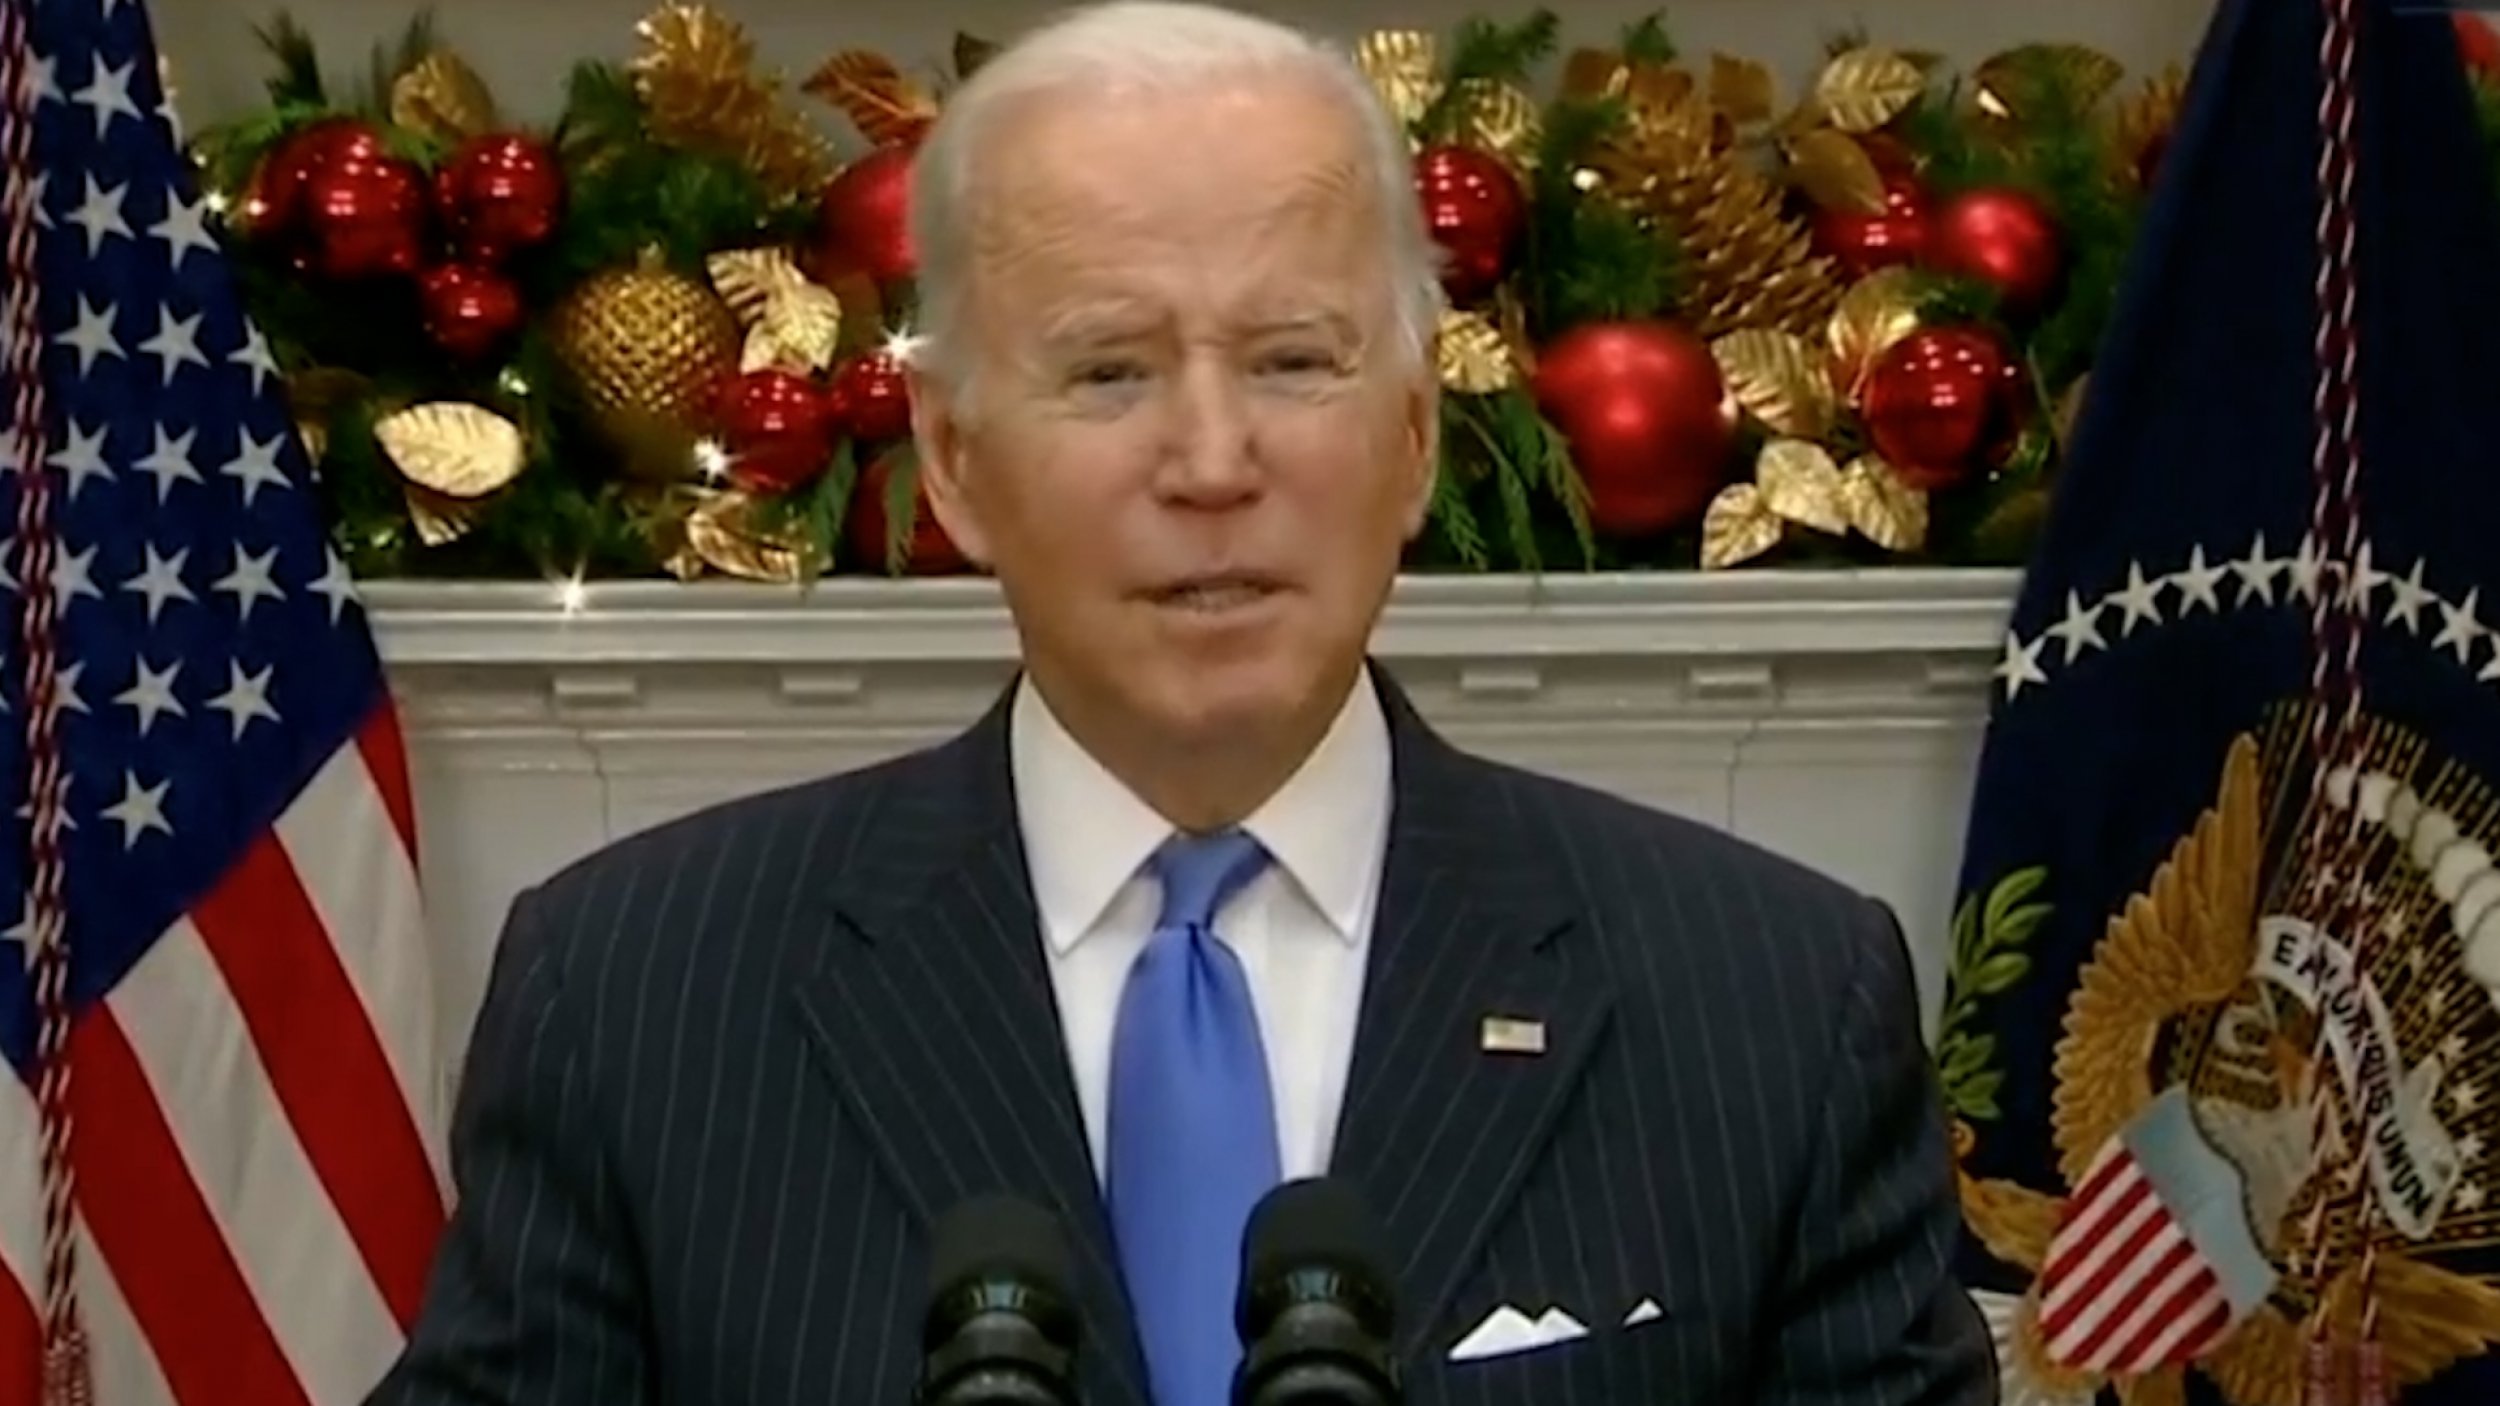 Biden Urges Americans To Wear Masks, Get COVID-19 Vaccine, Booster Ahead Of Christmas